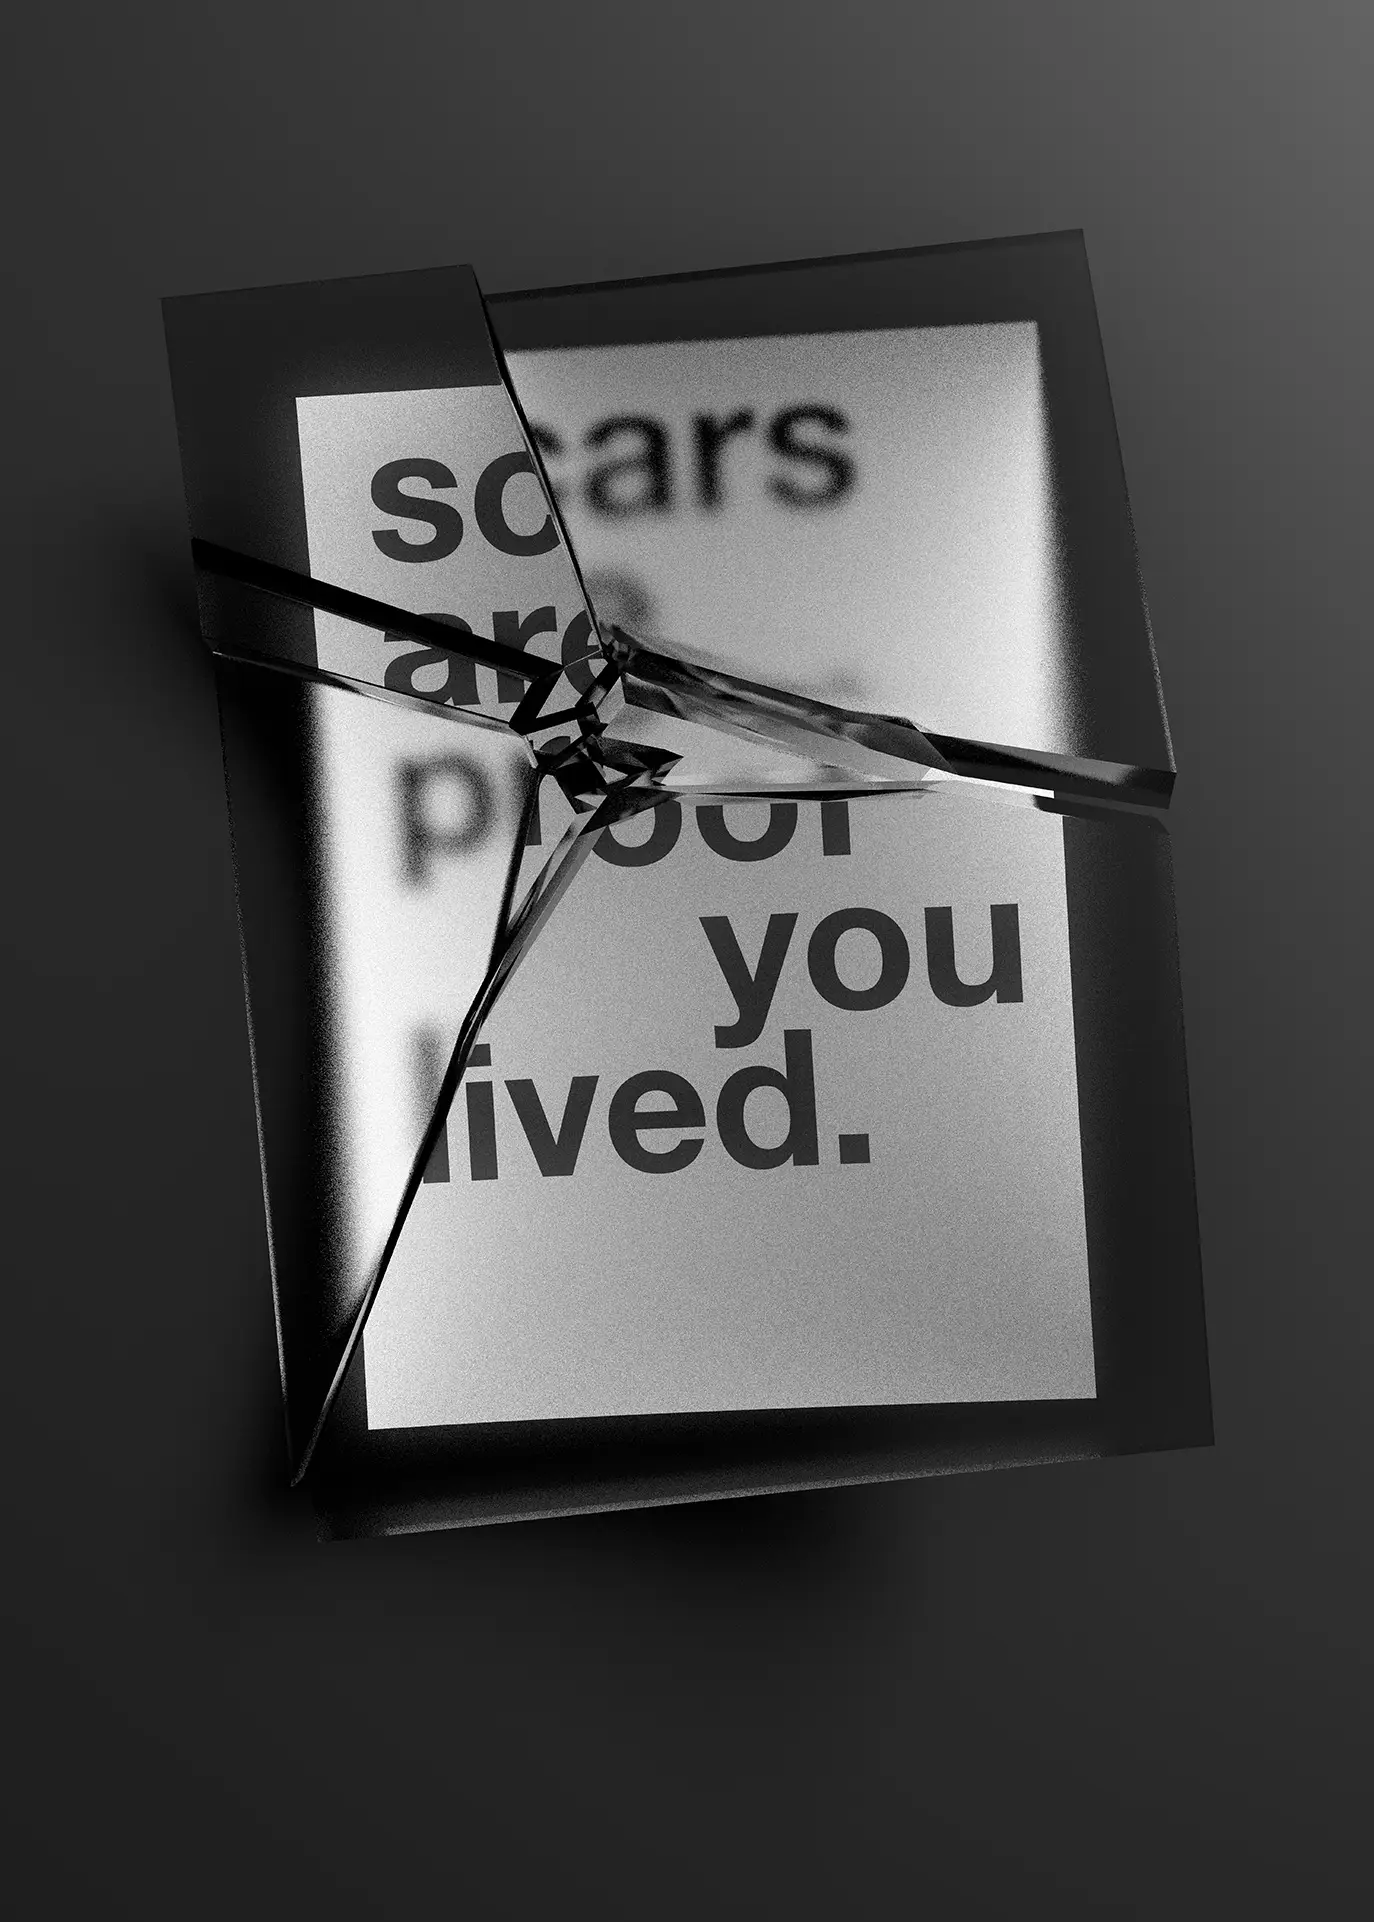 Text under shattered glass reading: Scars are proof you lived.